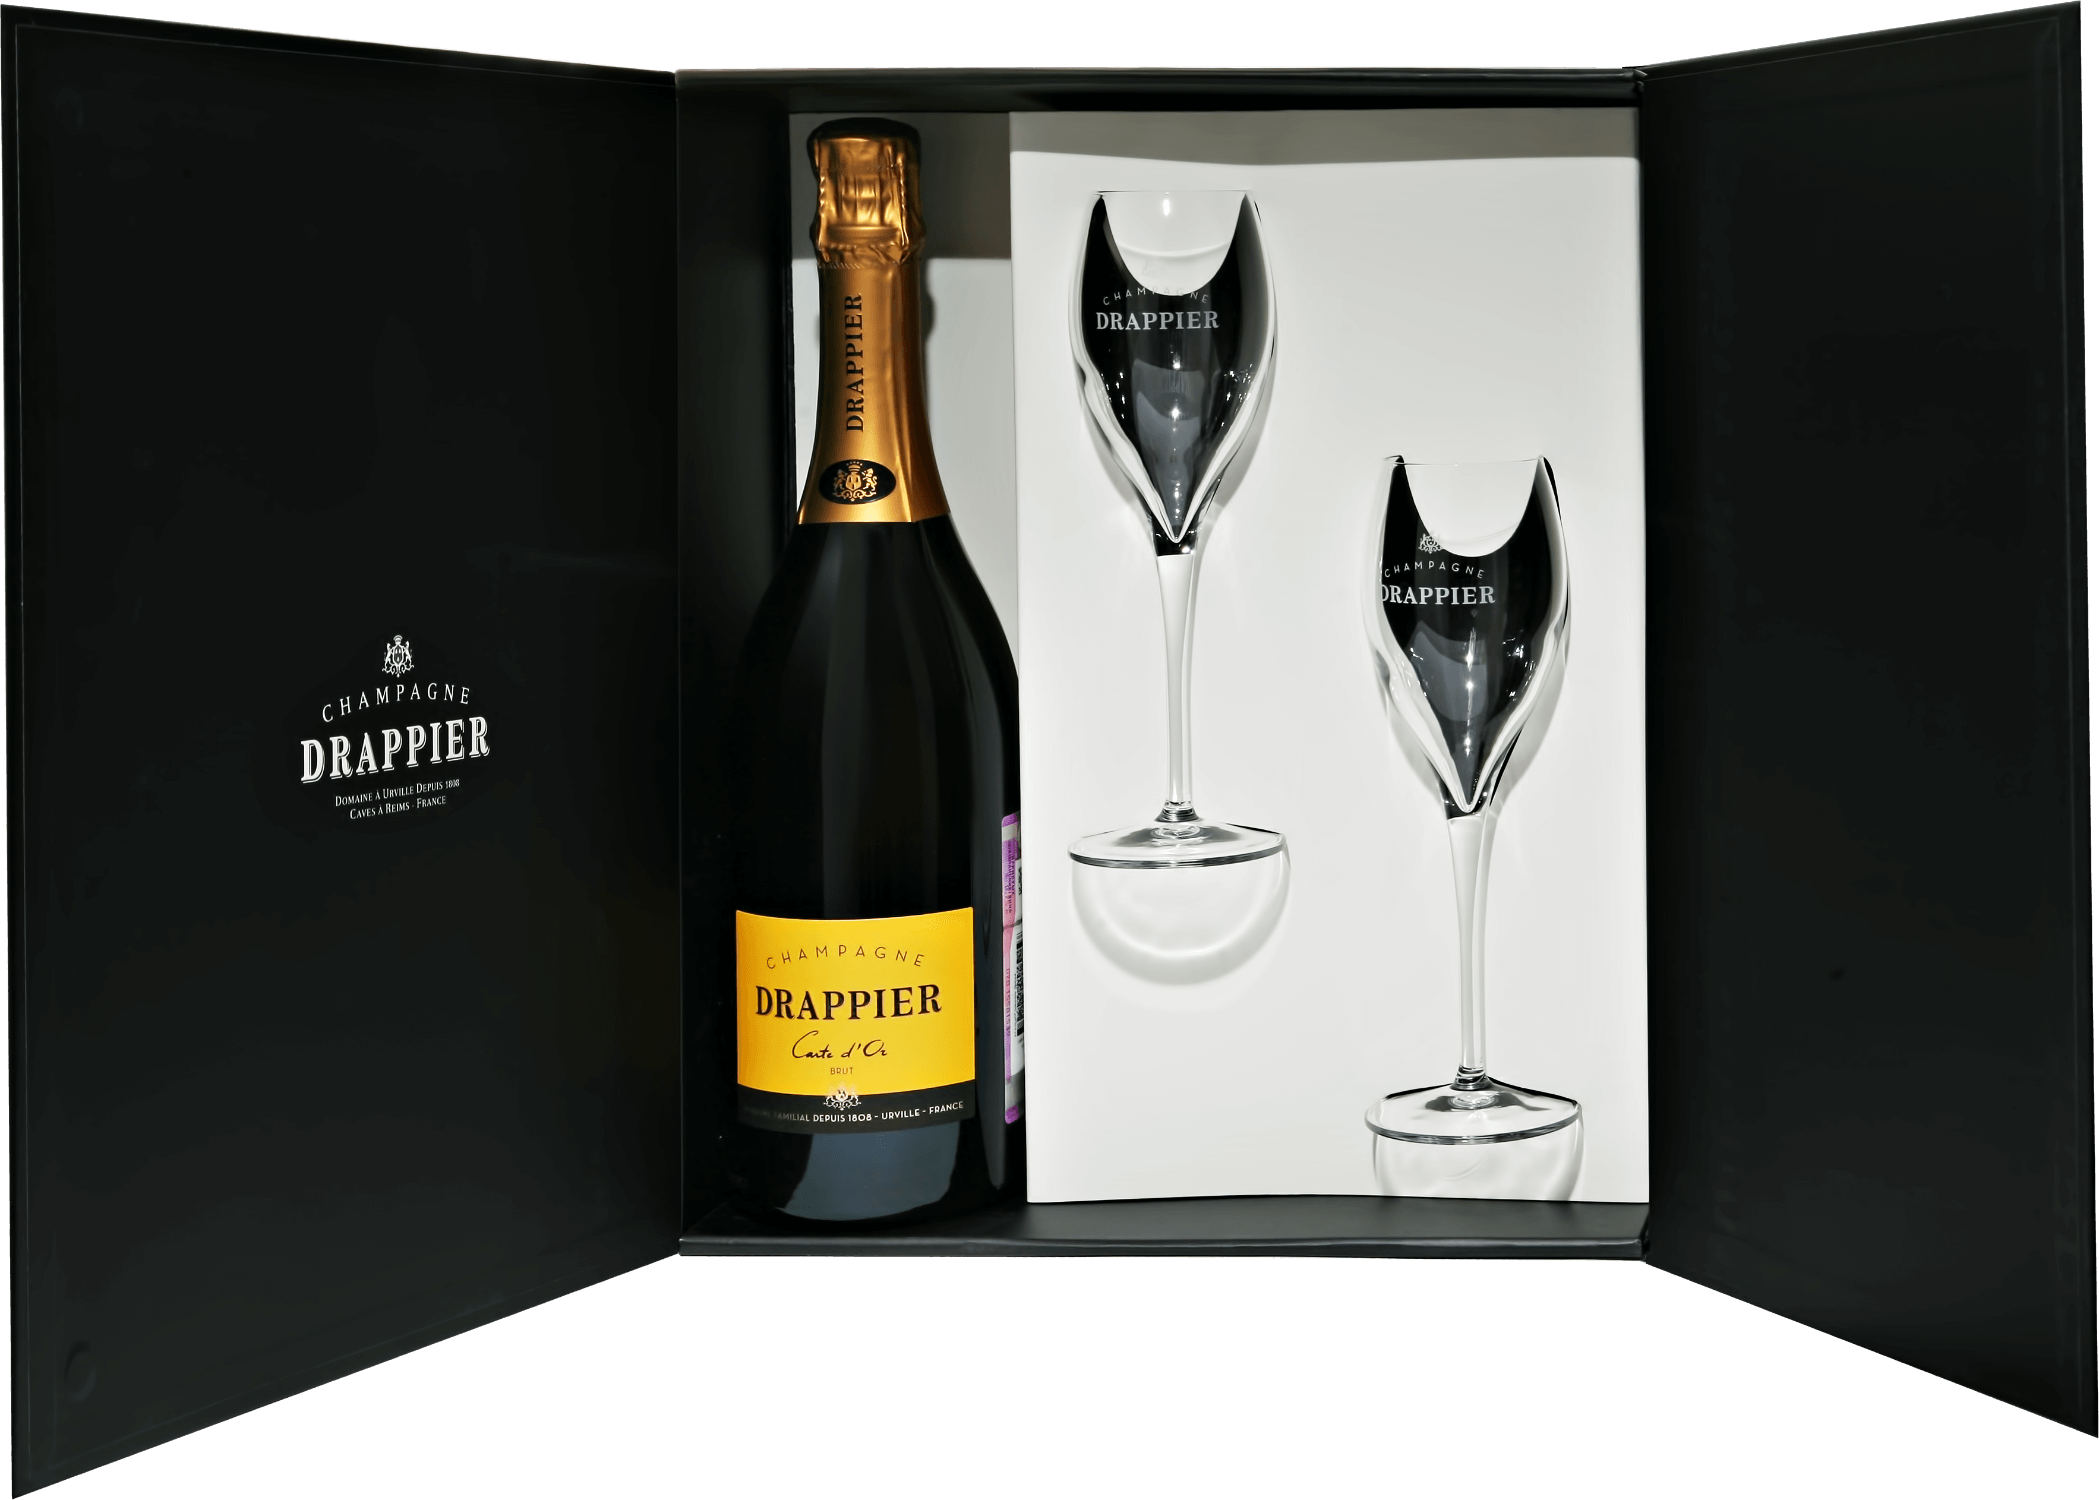 Drappier Carte d’Or Brut Champagne AOP in gift box with two glasses drappier andquot grande sendreeandquot gift box with 2 glasses